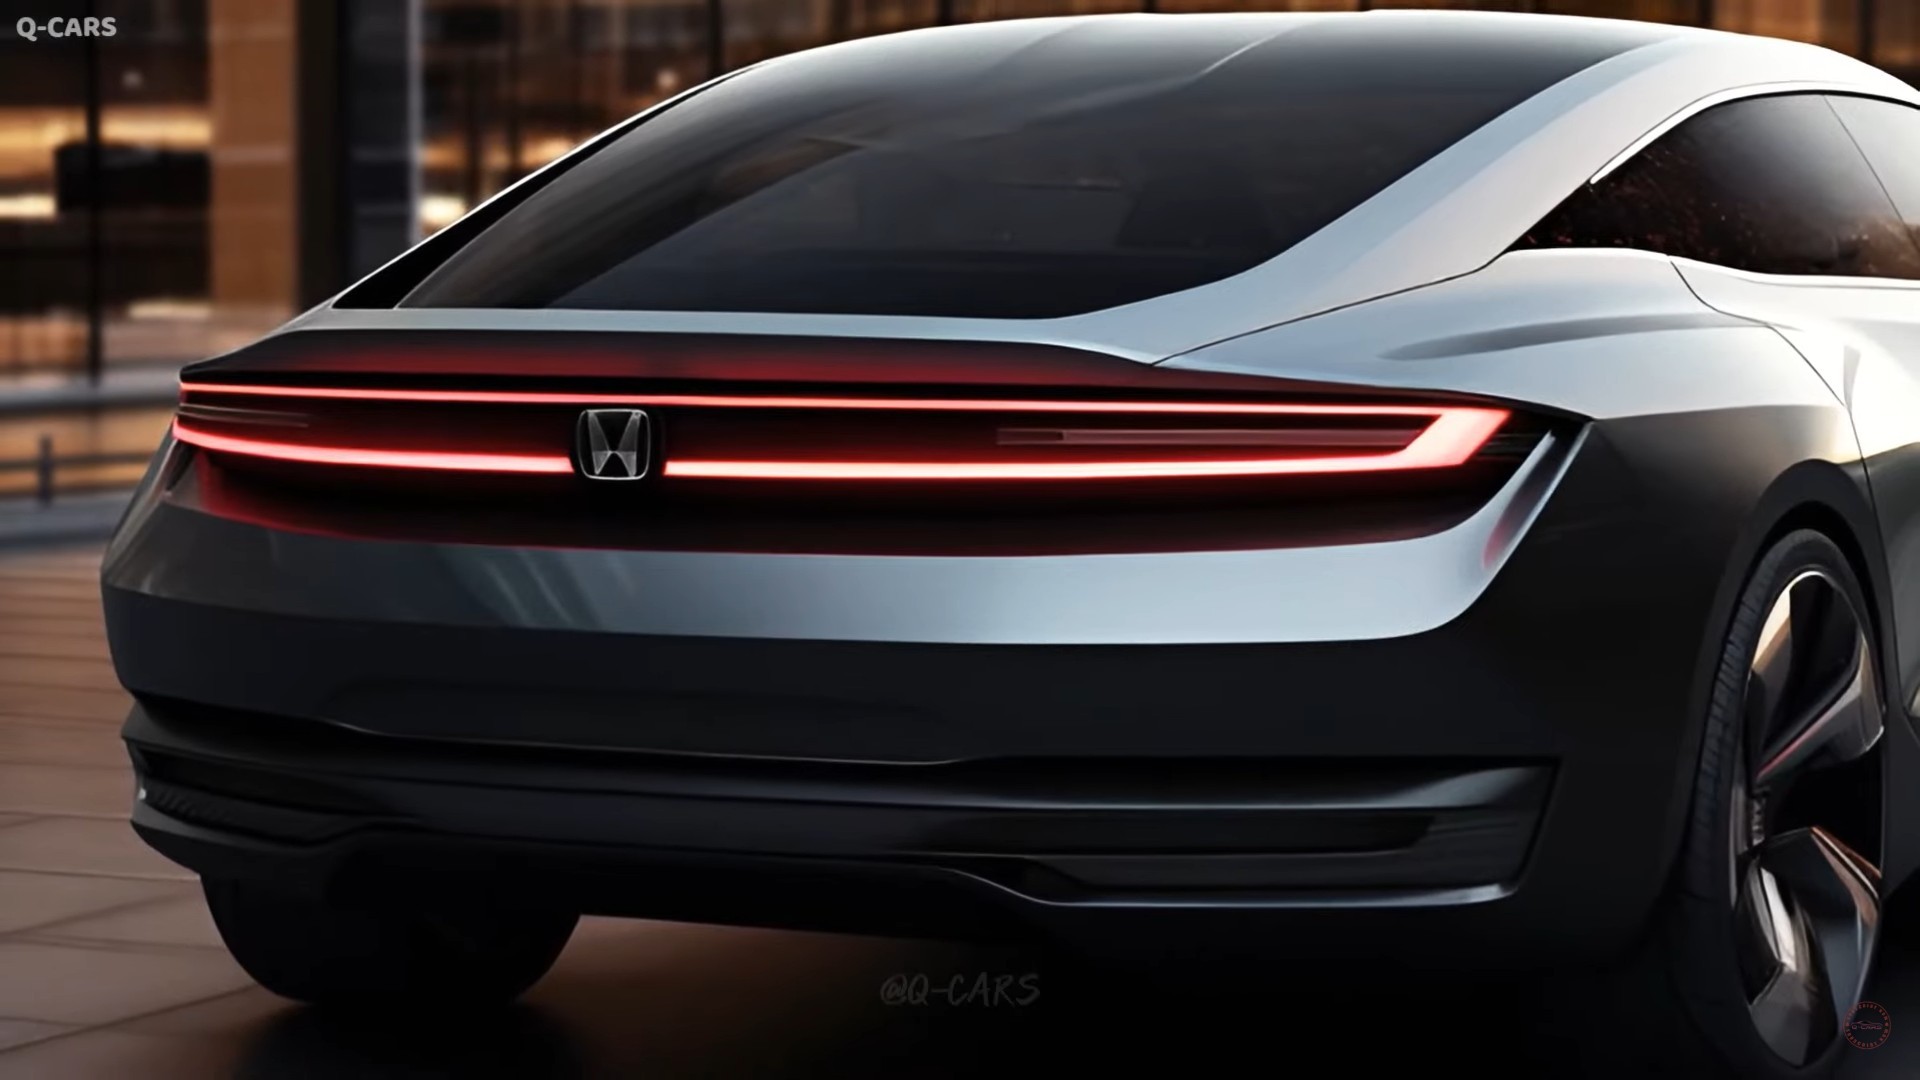 Redesigned 2025 Honda Accord Aims to Surprise With Significant Virtual